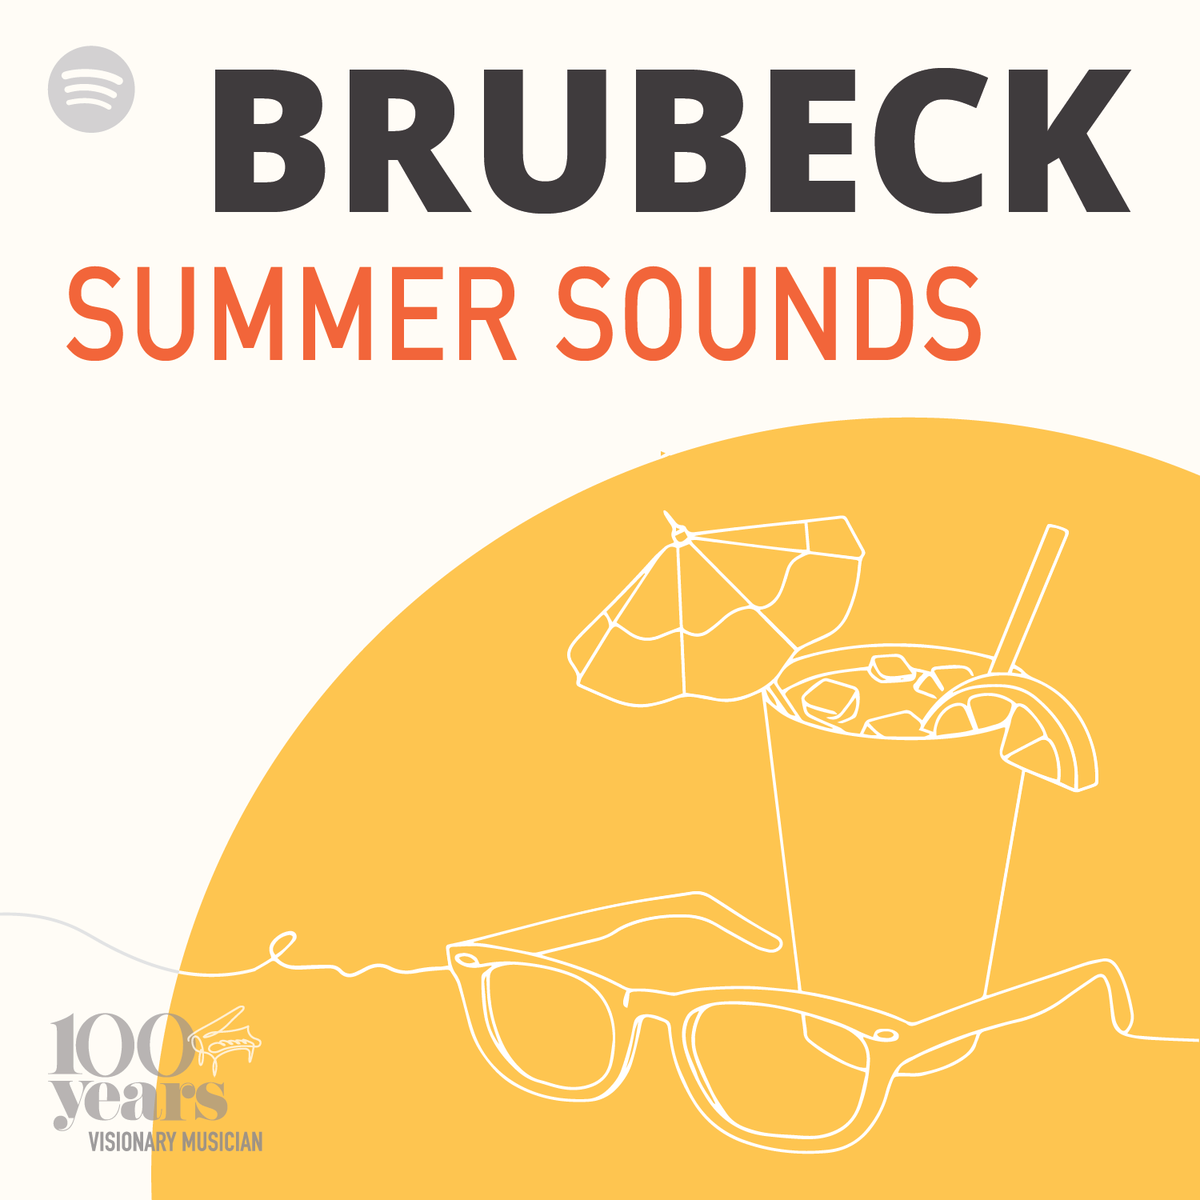 🎶🧊 Cool down with the sounds of this brand new Brubeck Summer Sounds playlist with tracks from Bossa Nova U.S.A. To Time Further Out to The Real Ambassadors and more. 👓☀️⛱ #Brubeck100 🎧 Listen on Spotify >> open.spotify.com/playlist/0g5tG…